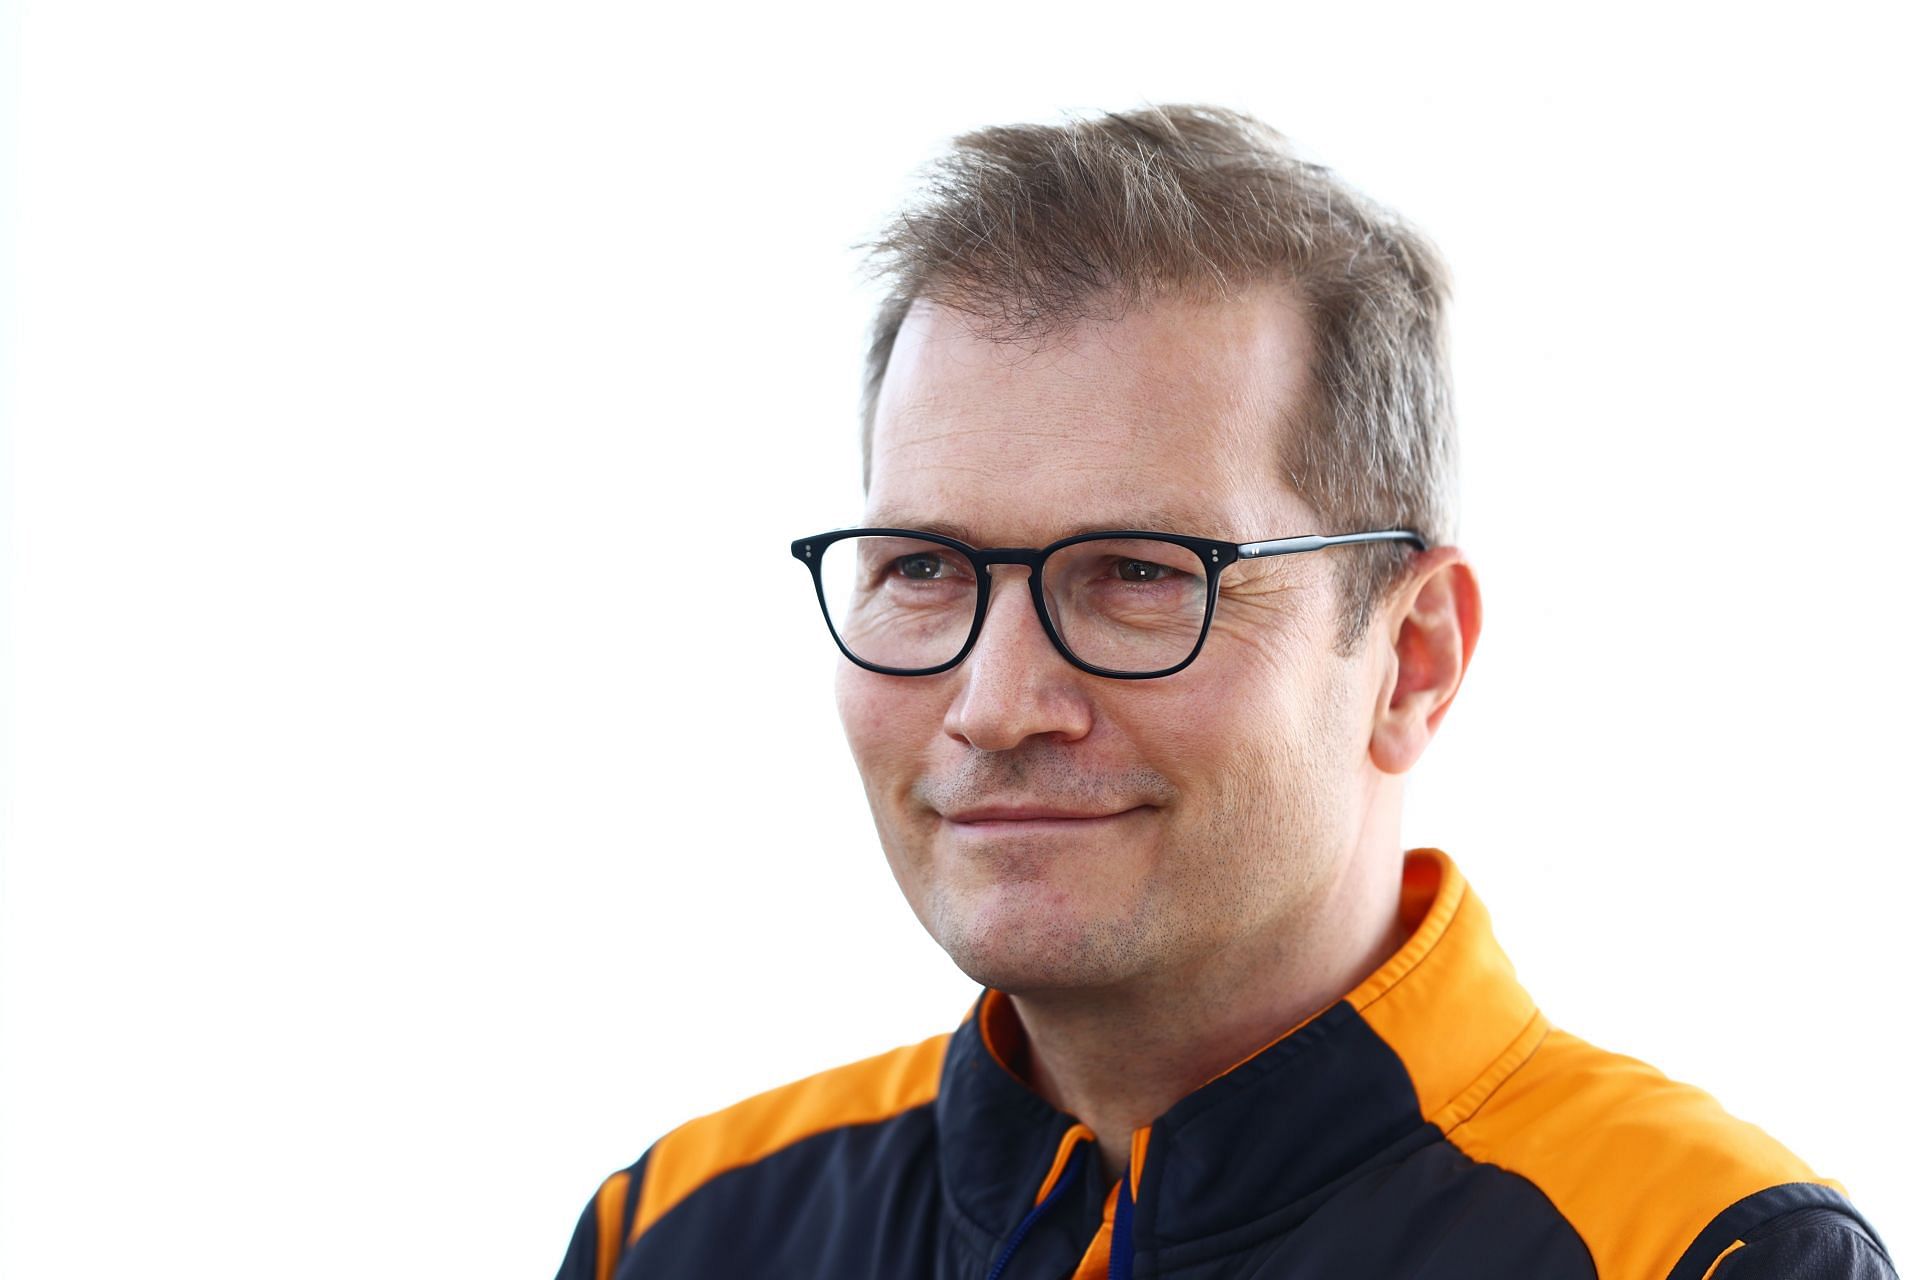 McLaren team principal Andreas Seidl in the Paddock before final practice ahead of the F1 Grand Prix of Saudi Arabia (Photo by Mark Thompson/Getty Images)